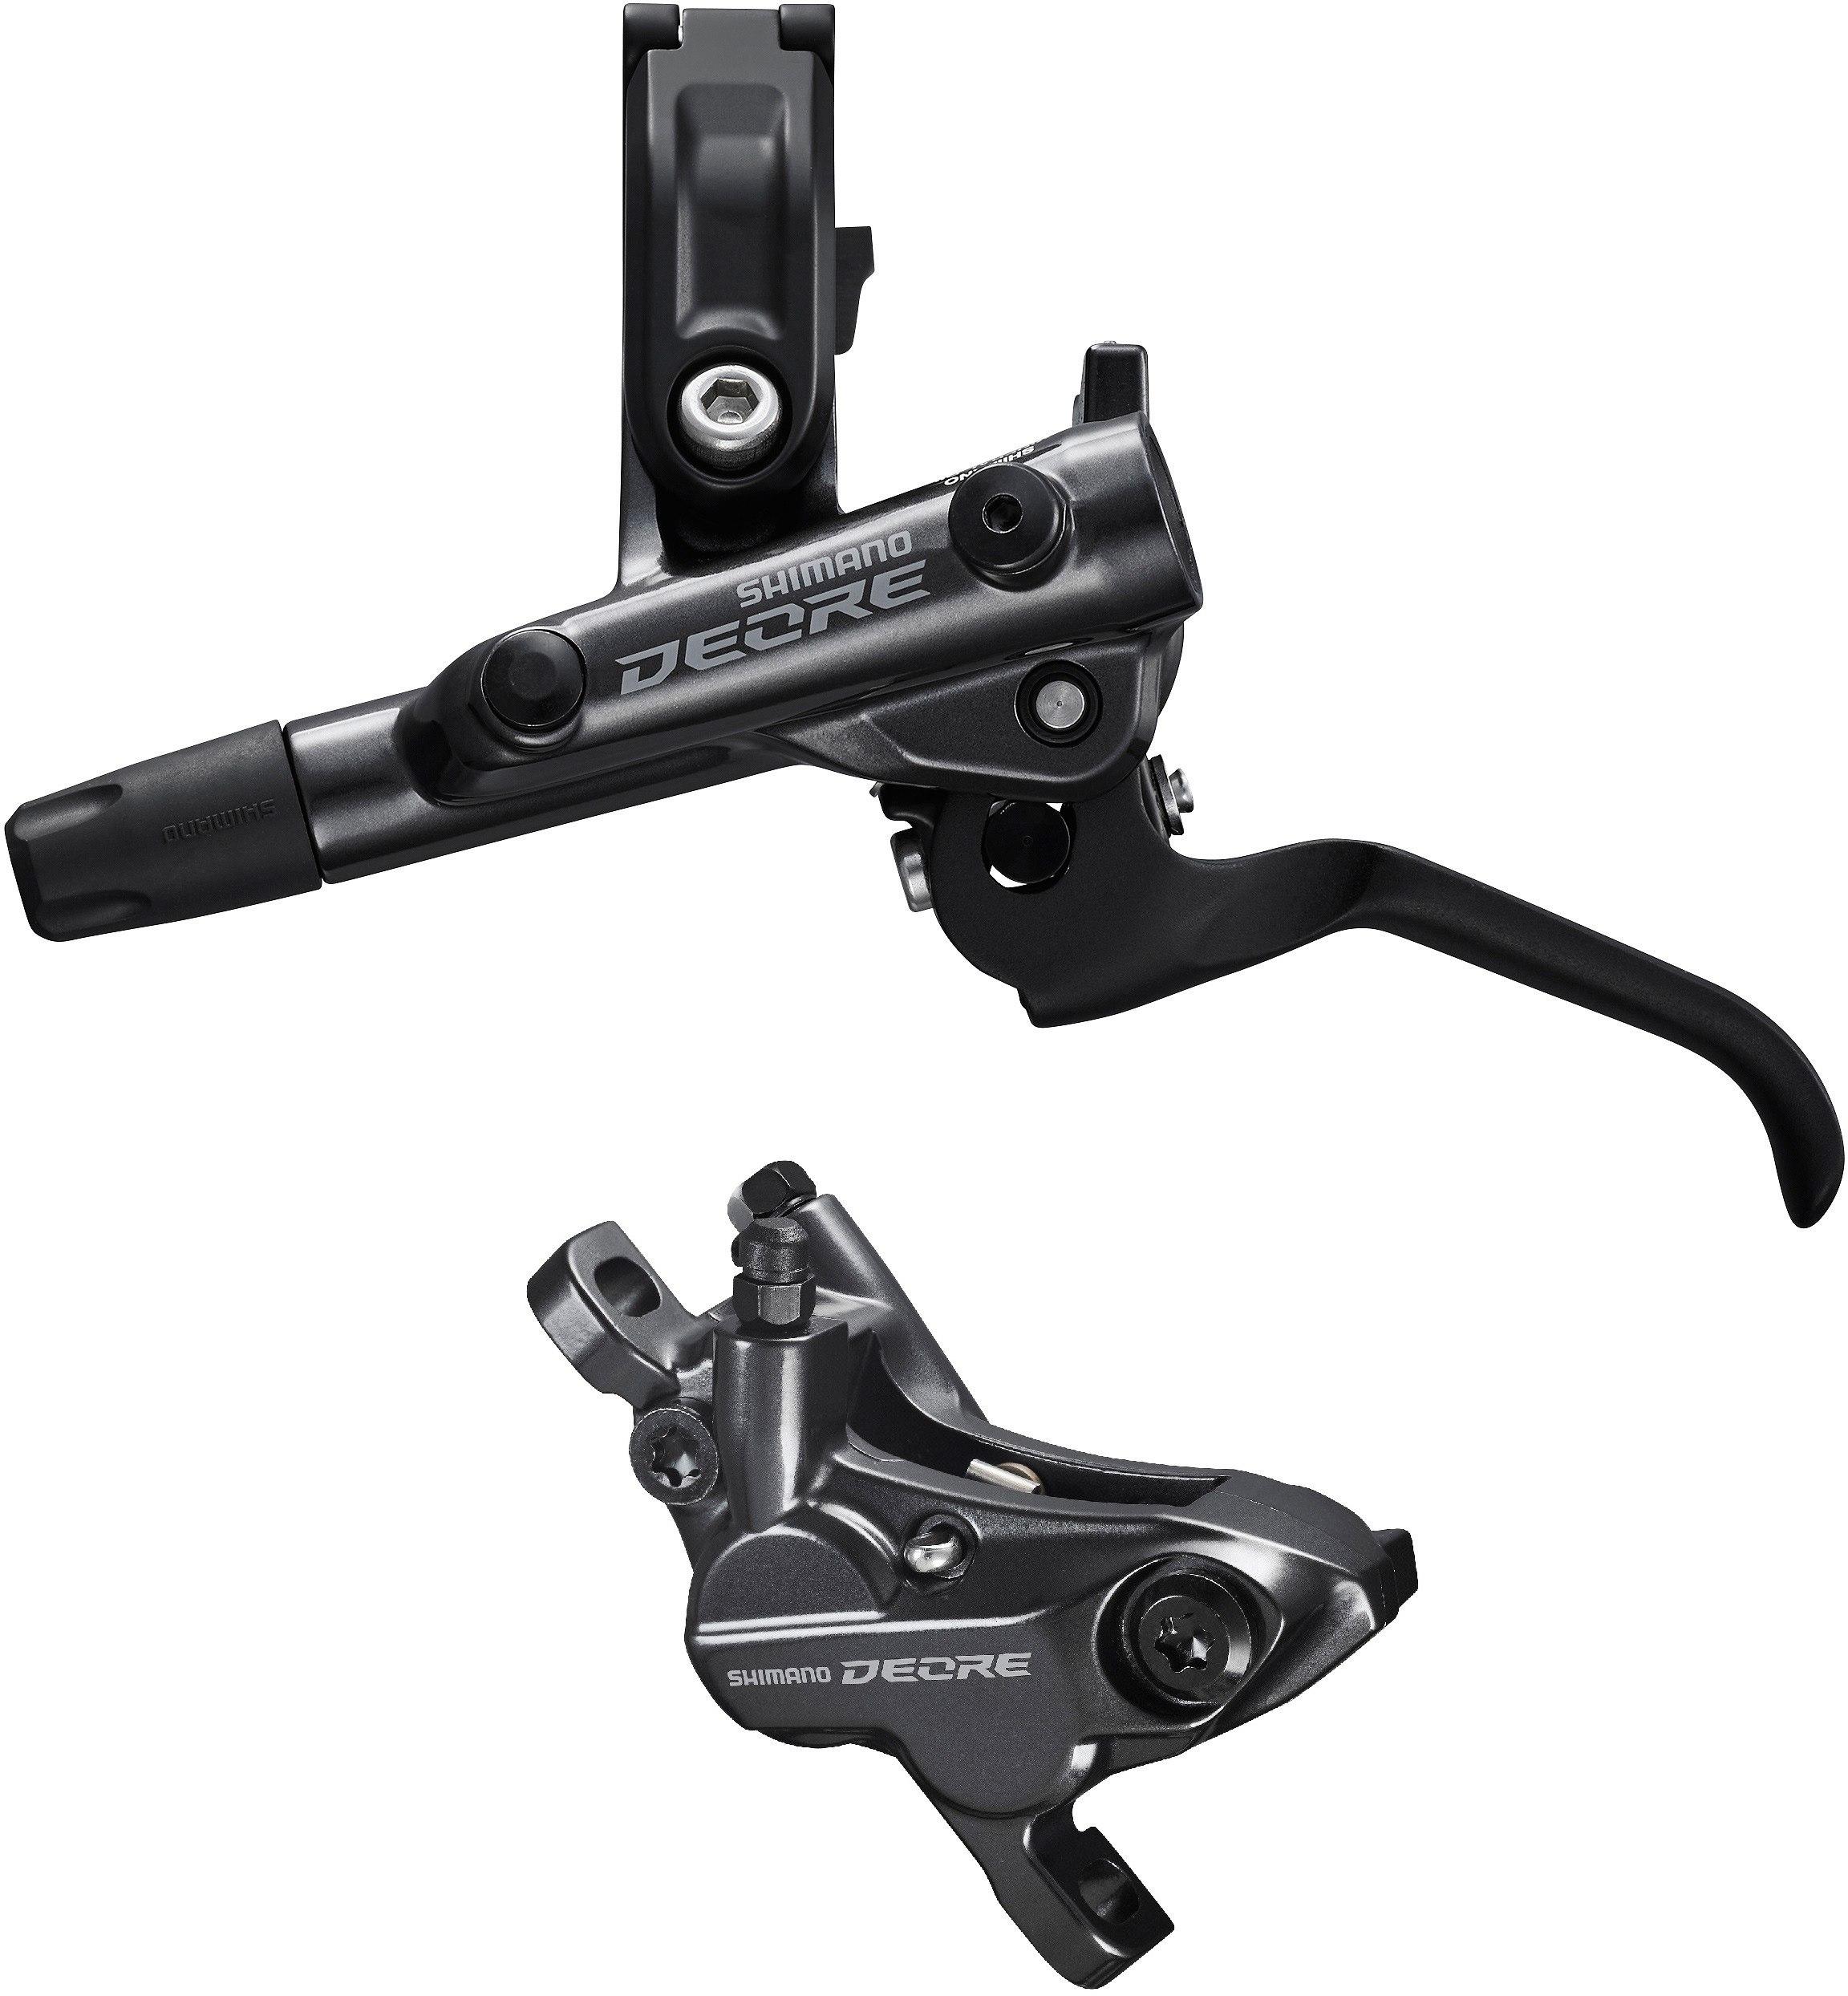 Shimano Deore M6120 Oe Disc Brake With Adapter  Black